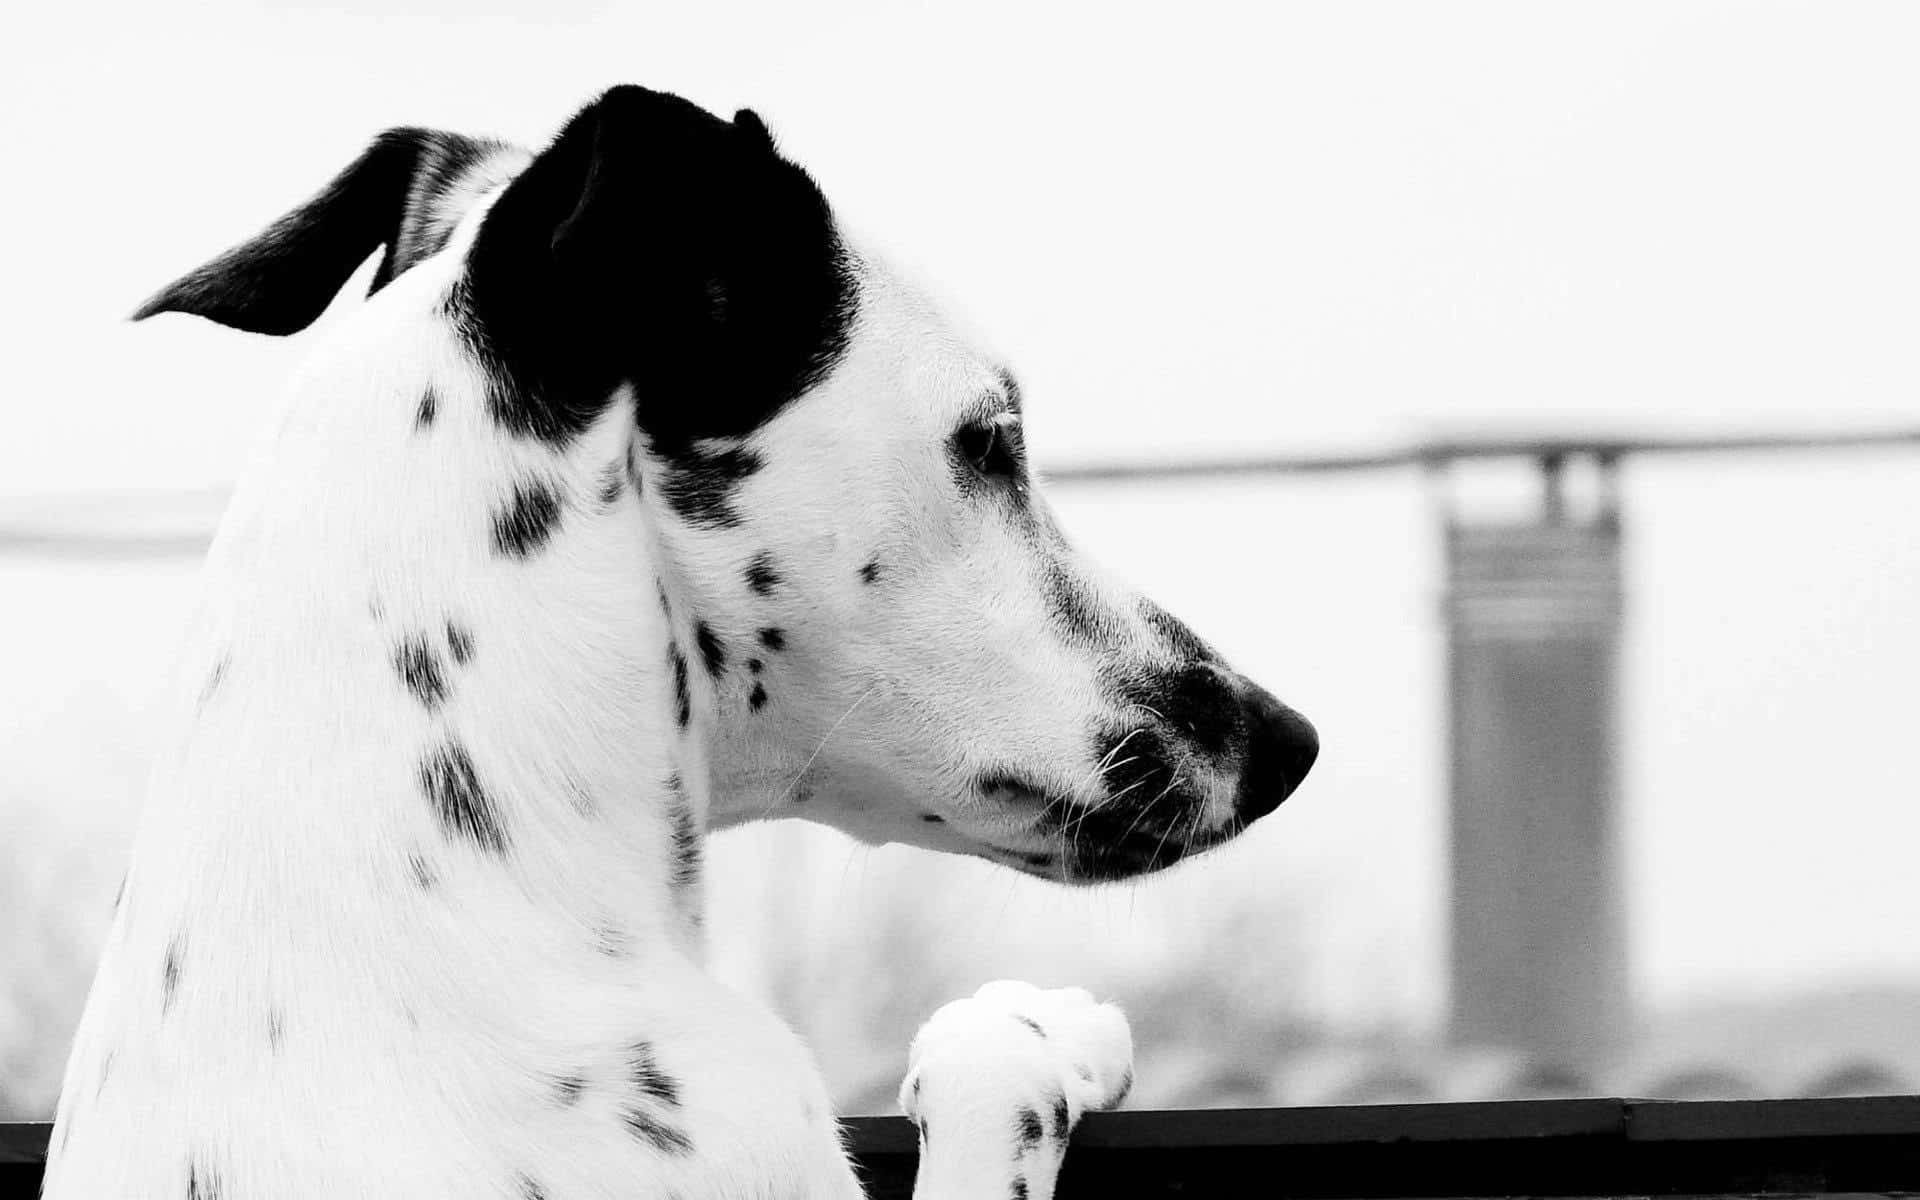 A close-up of a Dalmatian dog with black, white and brown spots.